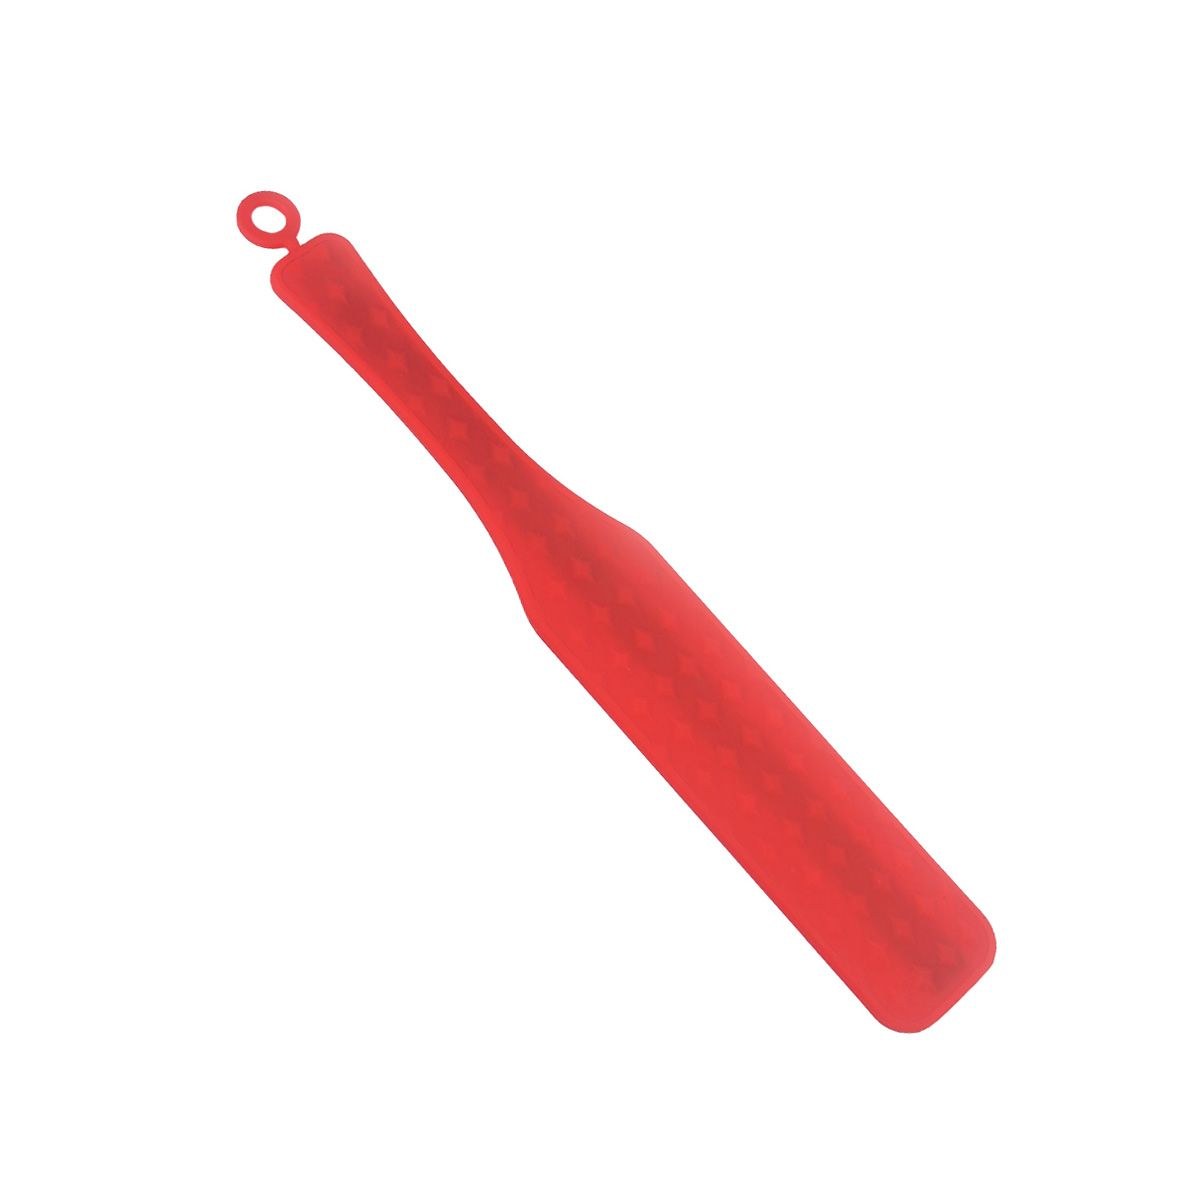 Rode silicone paddle